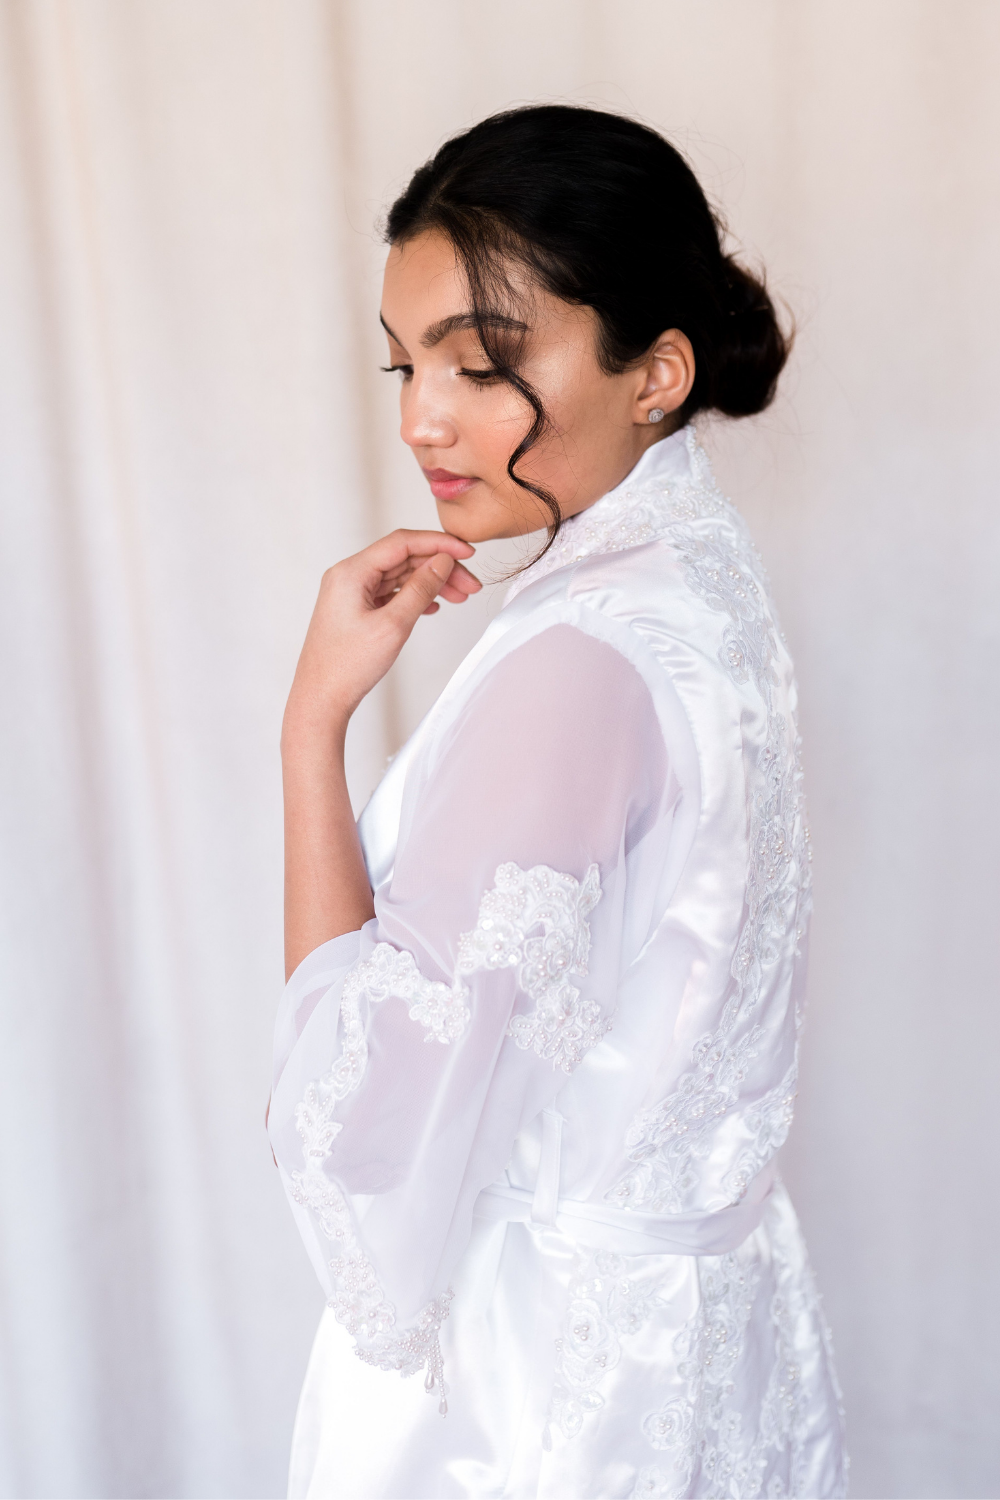 Finding The Best Wedding Nightgown and Bridal Robe Set on Your